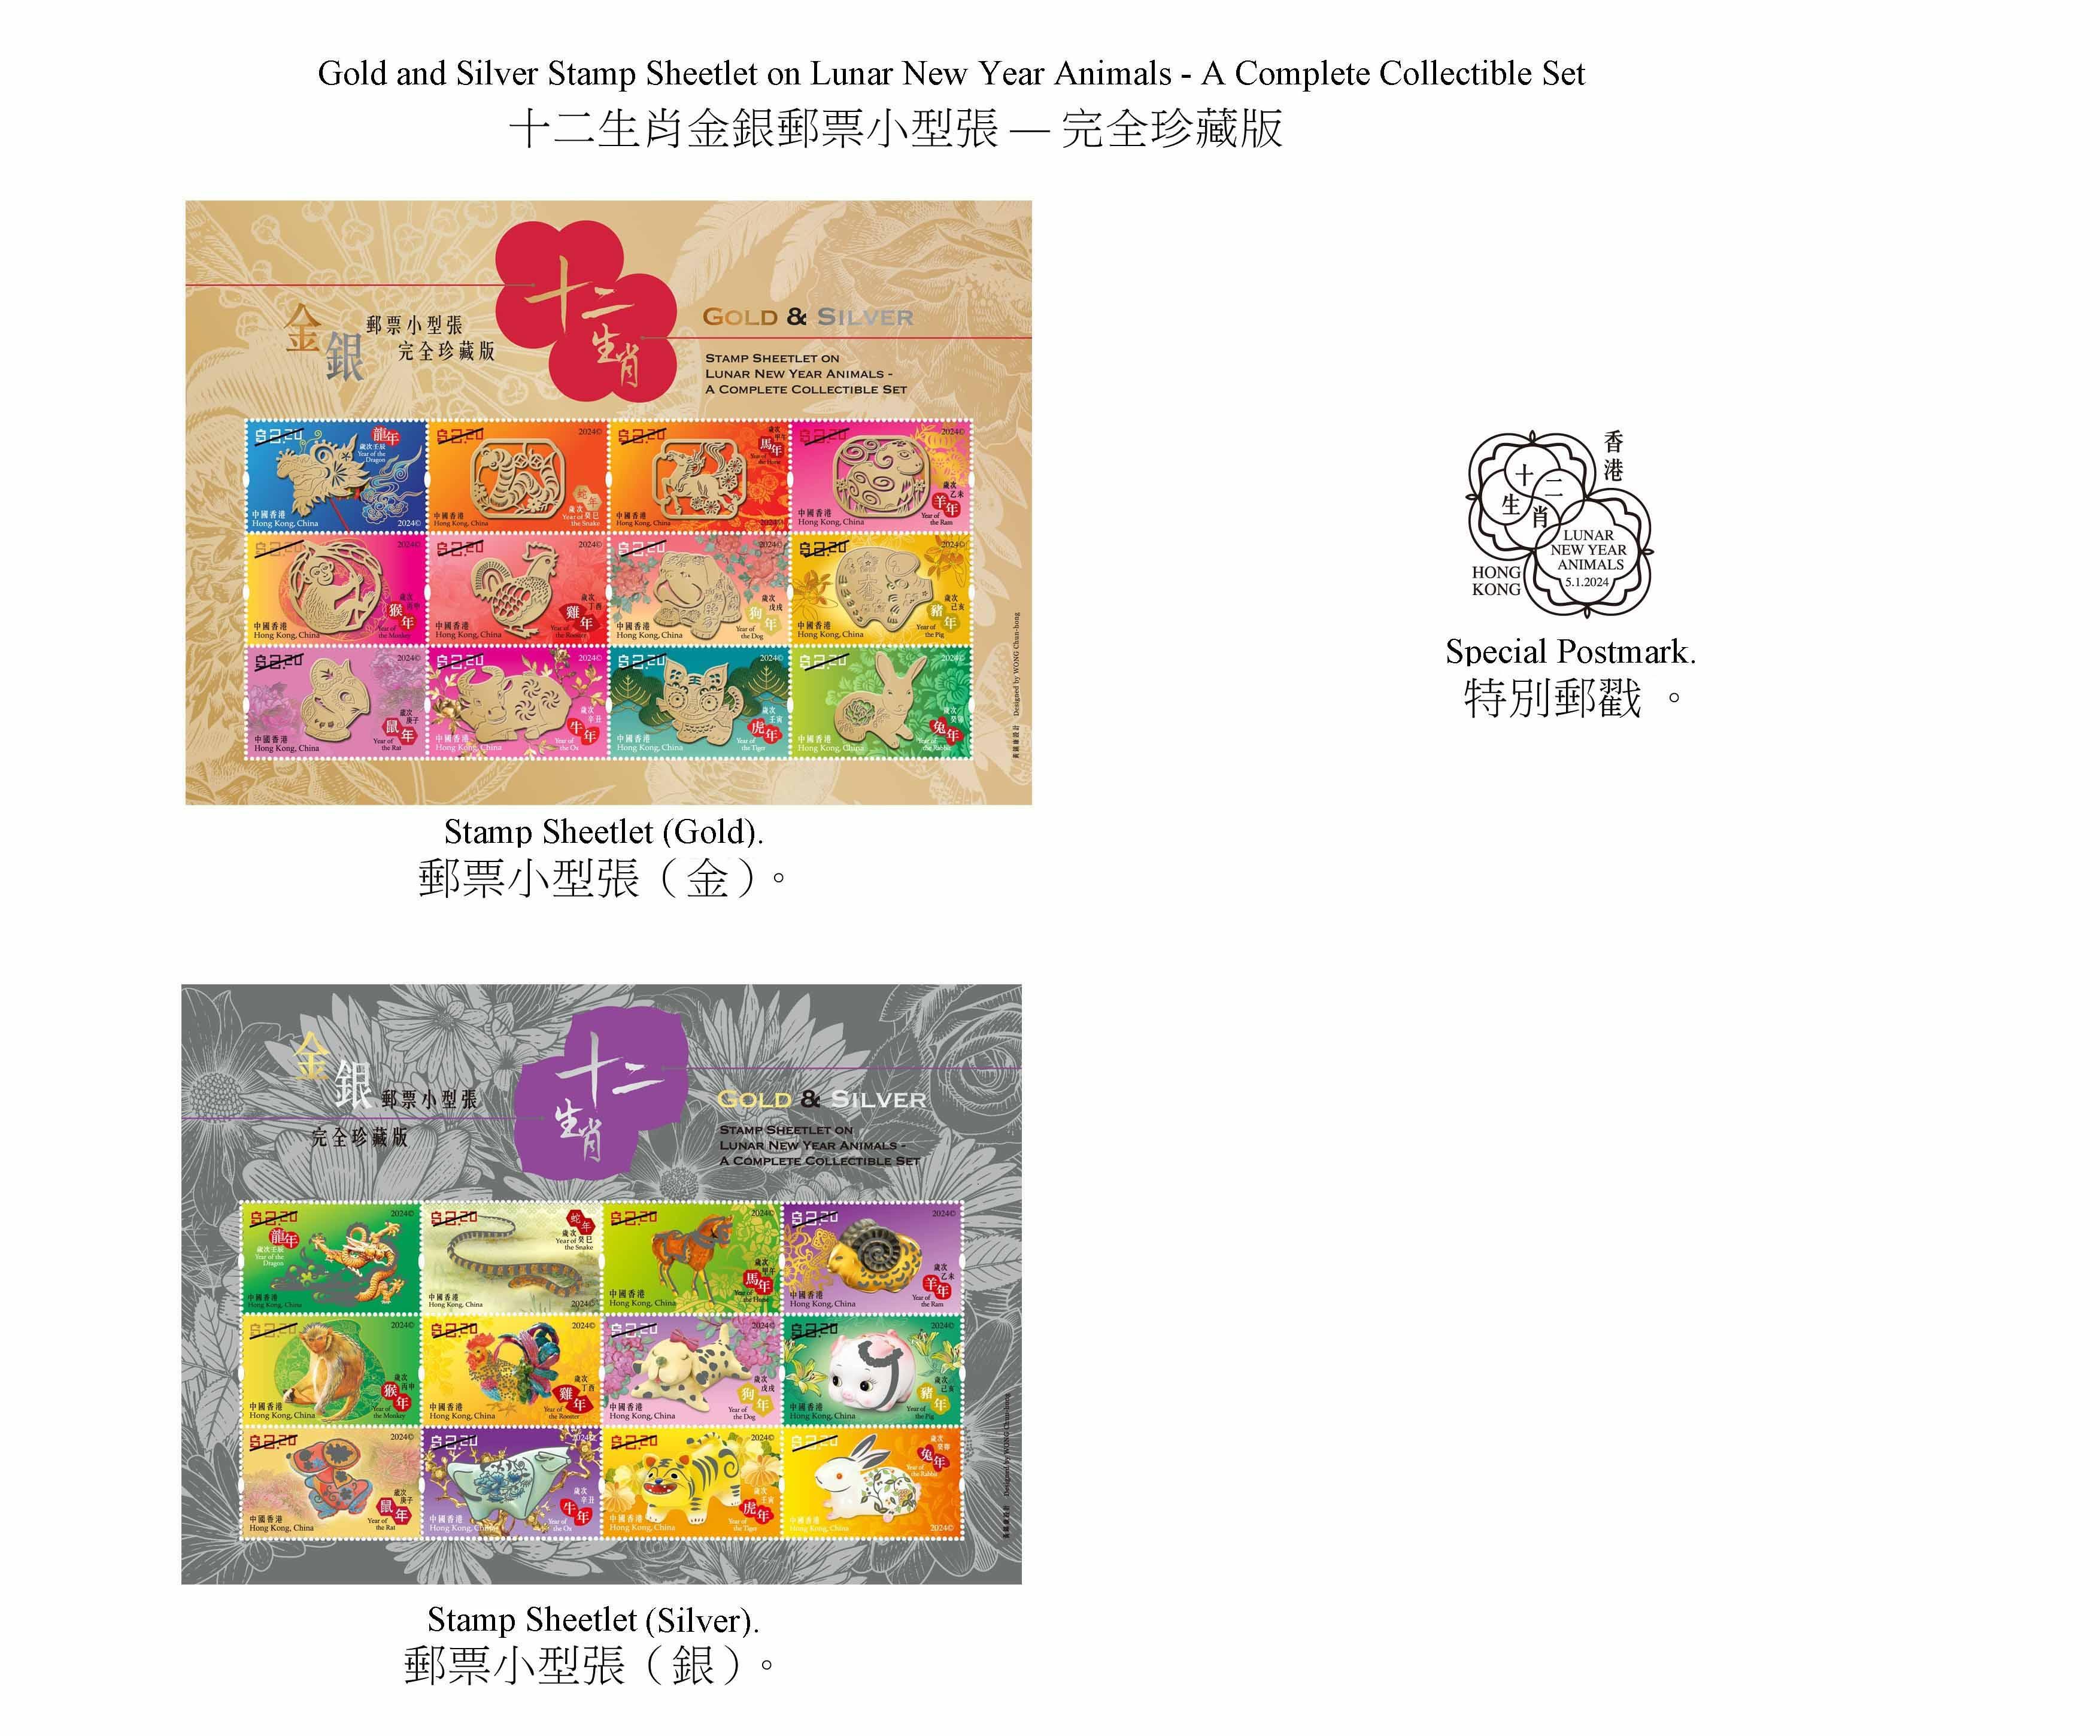 Hongkong Post will launch a special stamp issue and associated philatelic products on the theme of "Year of the Dragon" on January 5, 2024 (Friday). The "Gold and Silver Stamp Sheetlet on Lunar New Year Animals - A Complete Collectible Set" will also be launched on the same day. Photos show the stamp sheetlets and the special postmark.
